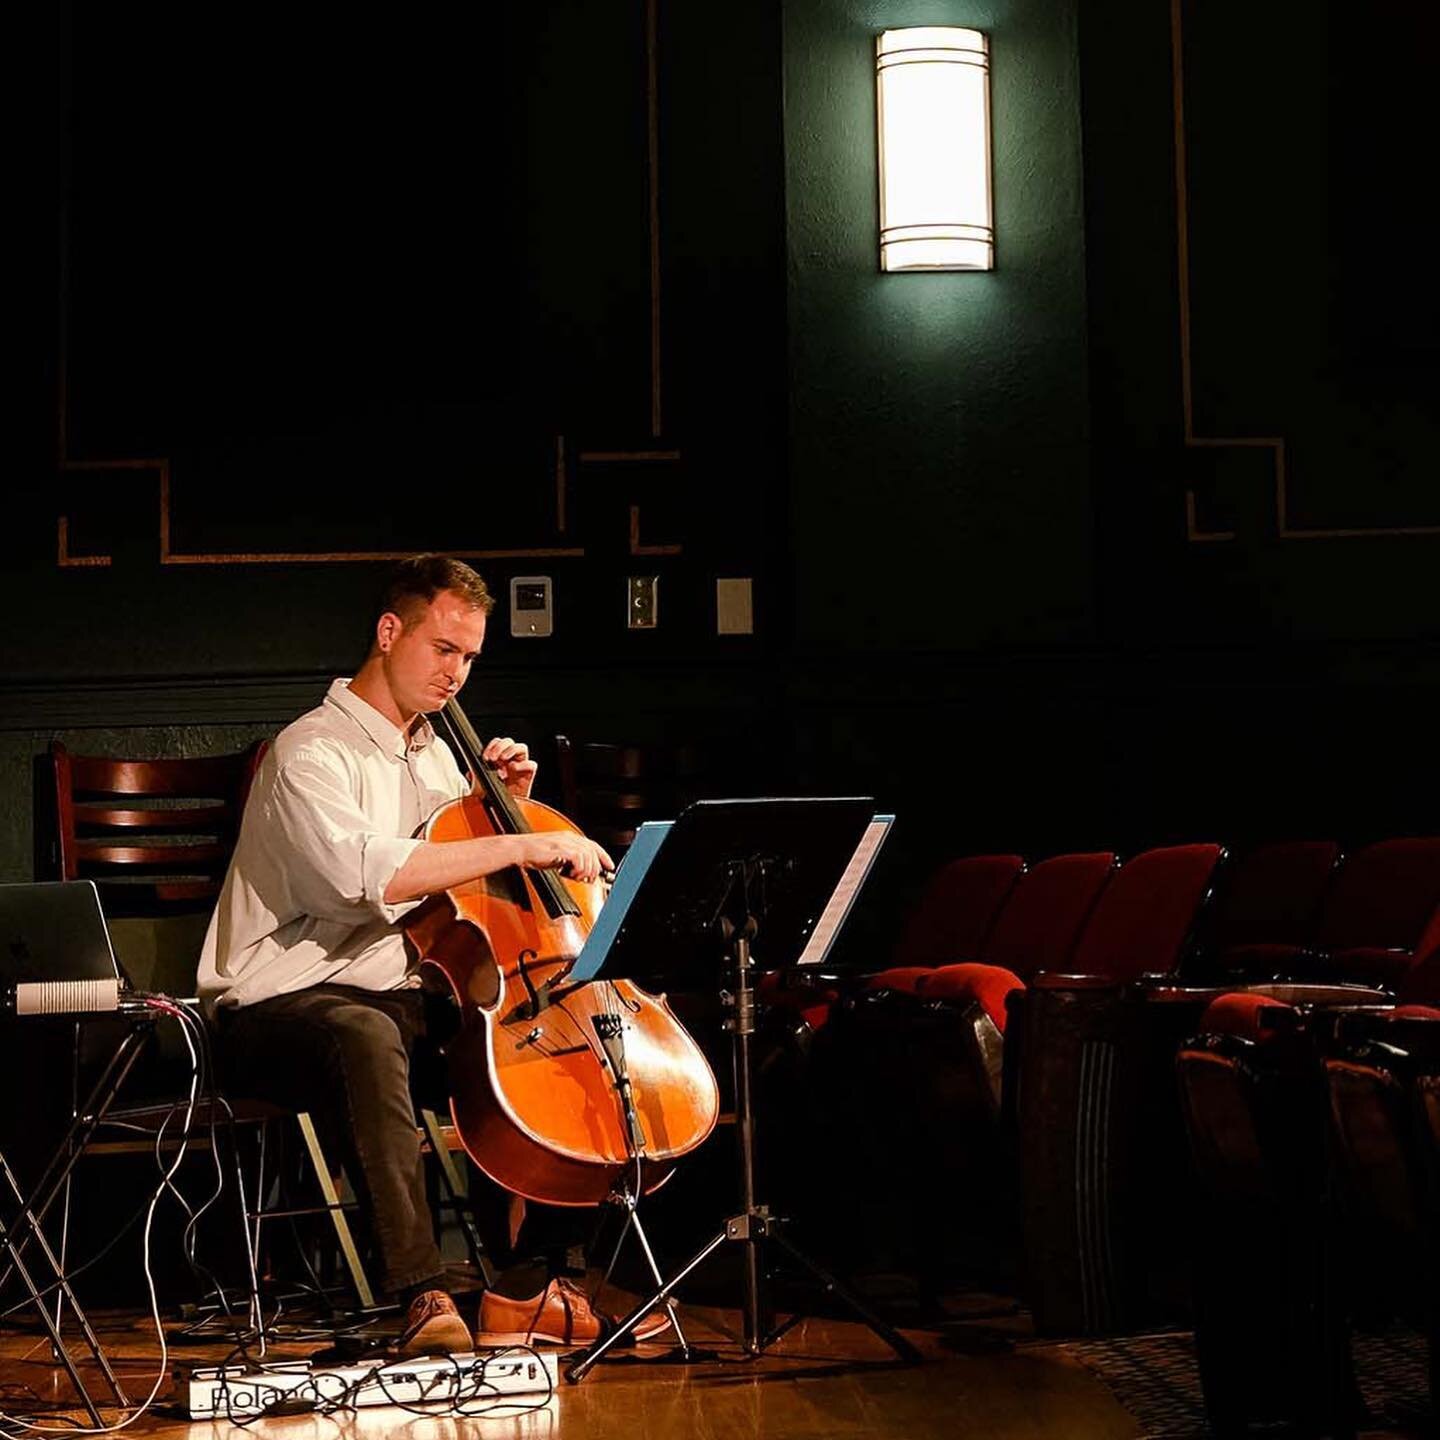 @camdeniff + Cello = 💜 
Tonight, I have the joy &amp; honor of providing cello ambience for folks as they arrive for the final closing night film of the Camden International Film Festival!
I&rsquo;ll be performing from 6:30 to 7:00 at @journeysendma